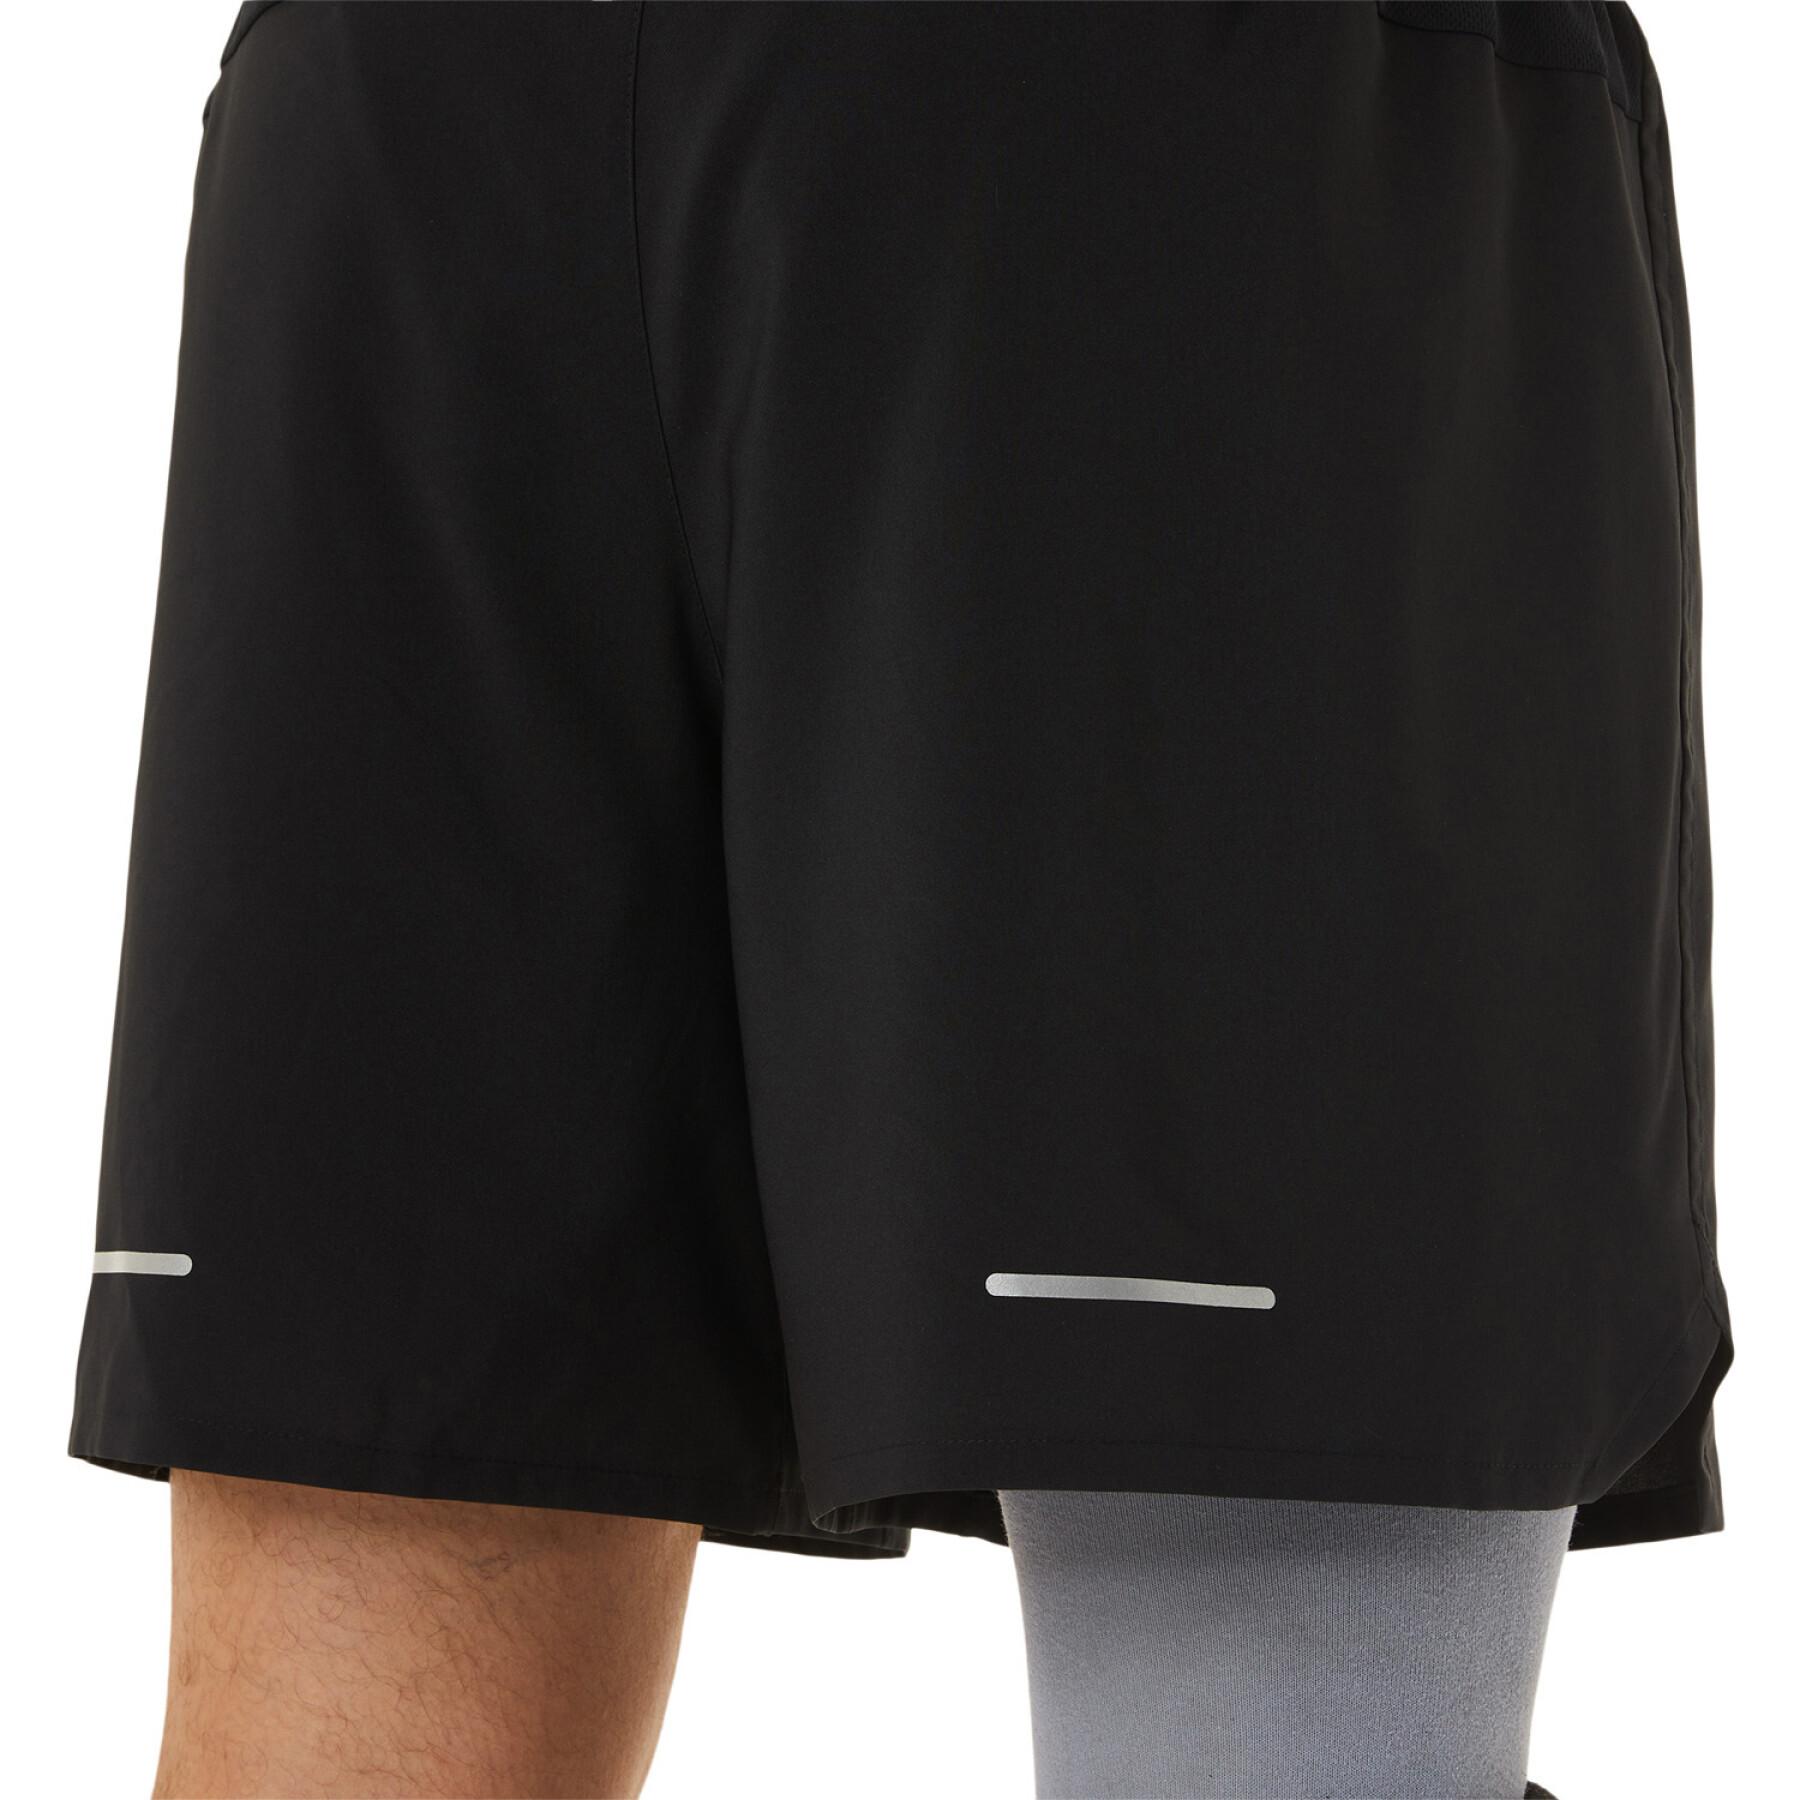 Shorts Asics Road 5In